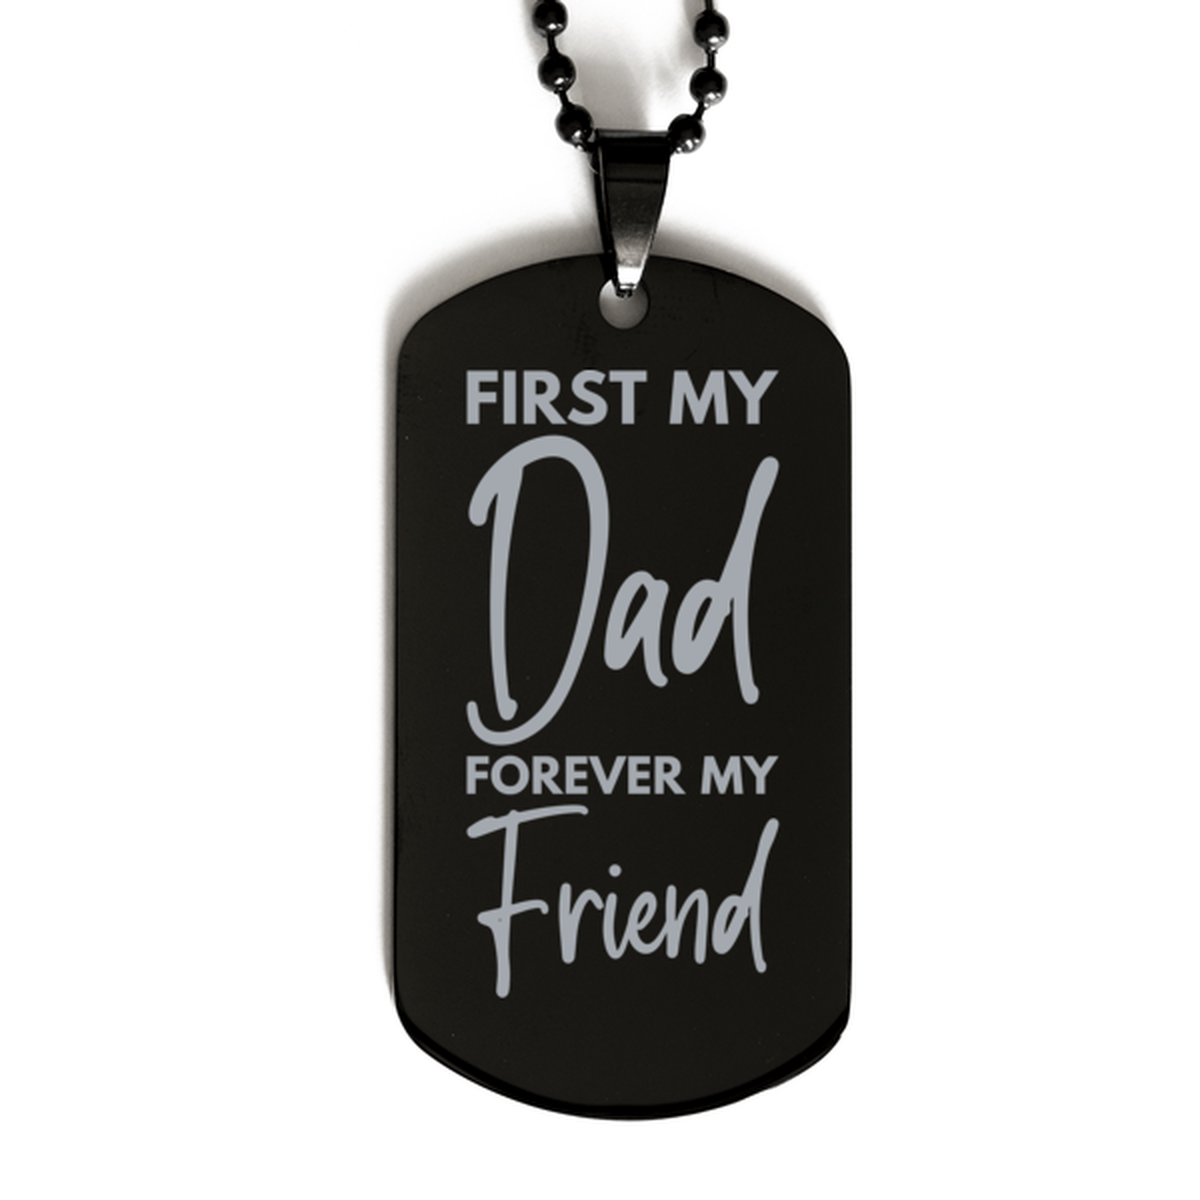 Inspirational Dad Black Dog Tag Necklace, First My Dad Forever My Friend, Best Birthday Gifts for Dad